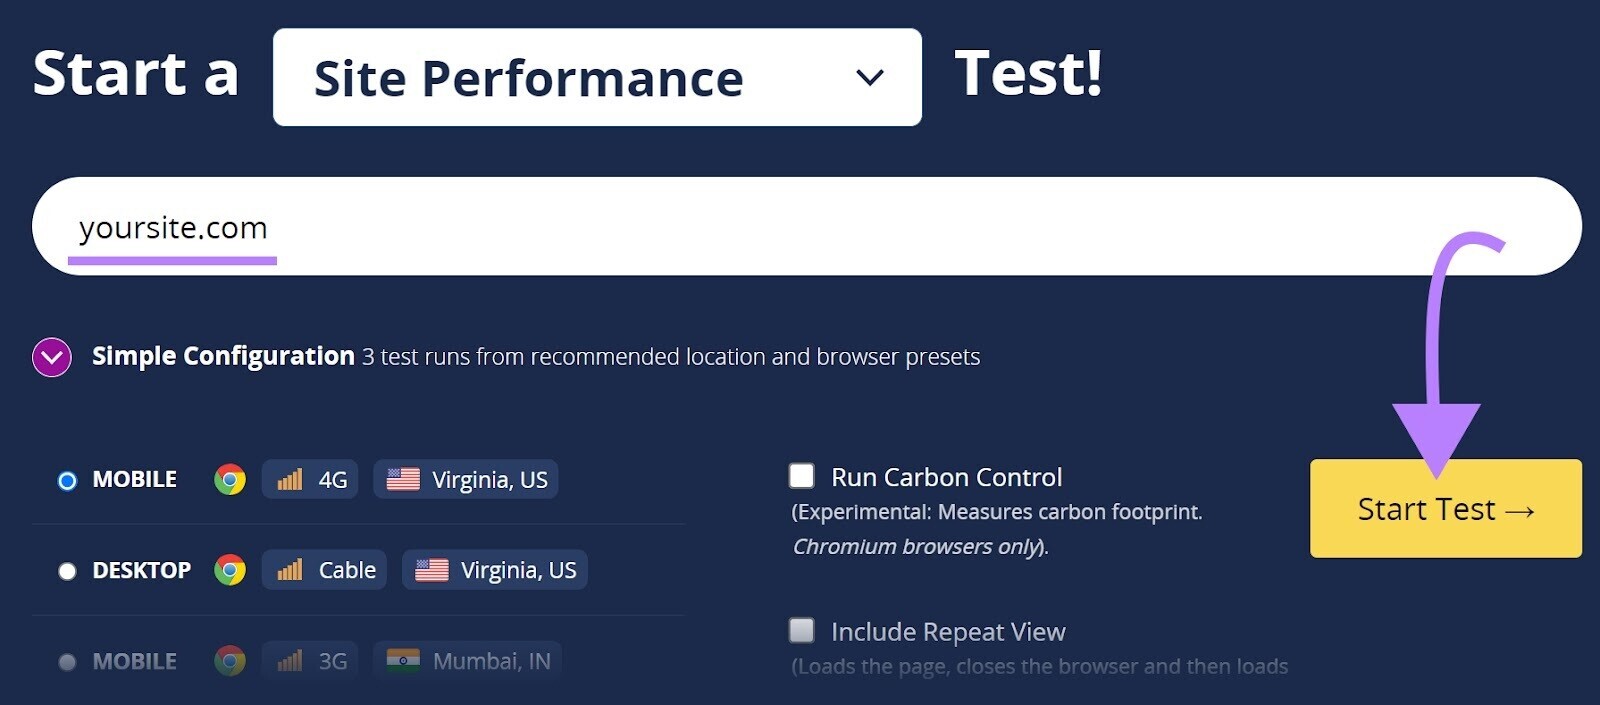 WebPageTest homepage with text "Start a Site Performance Test!"